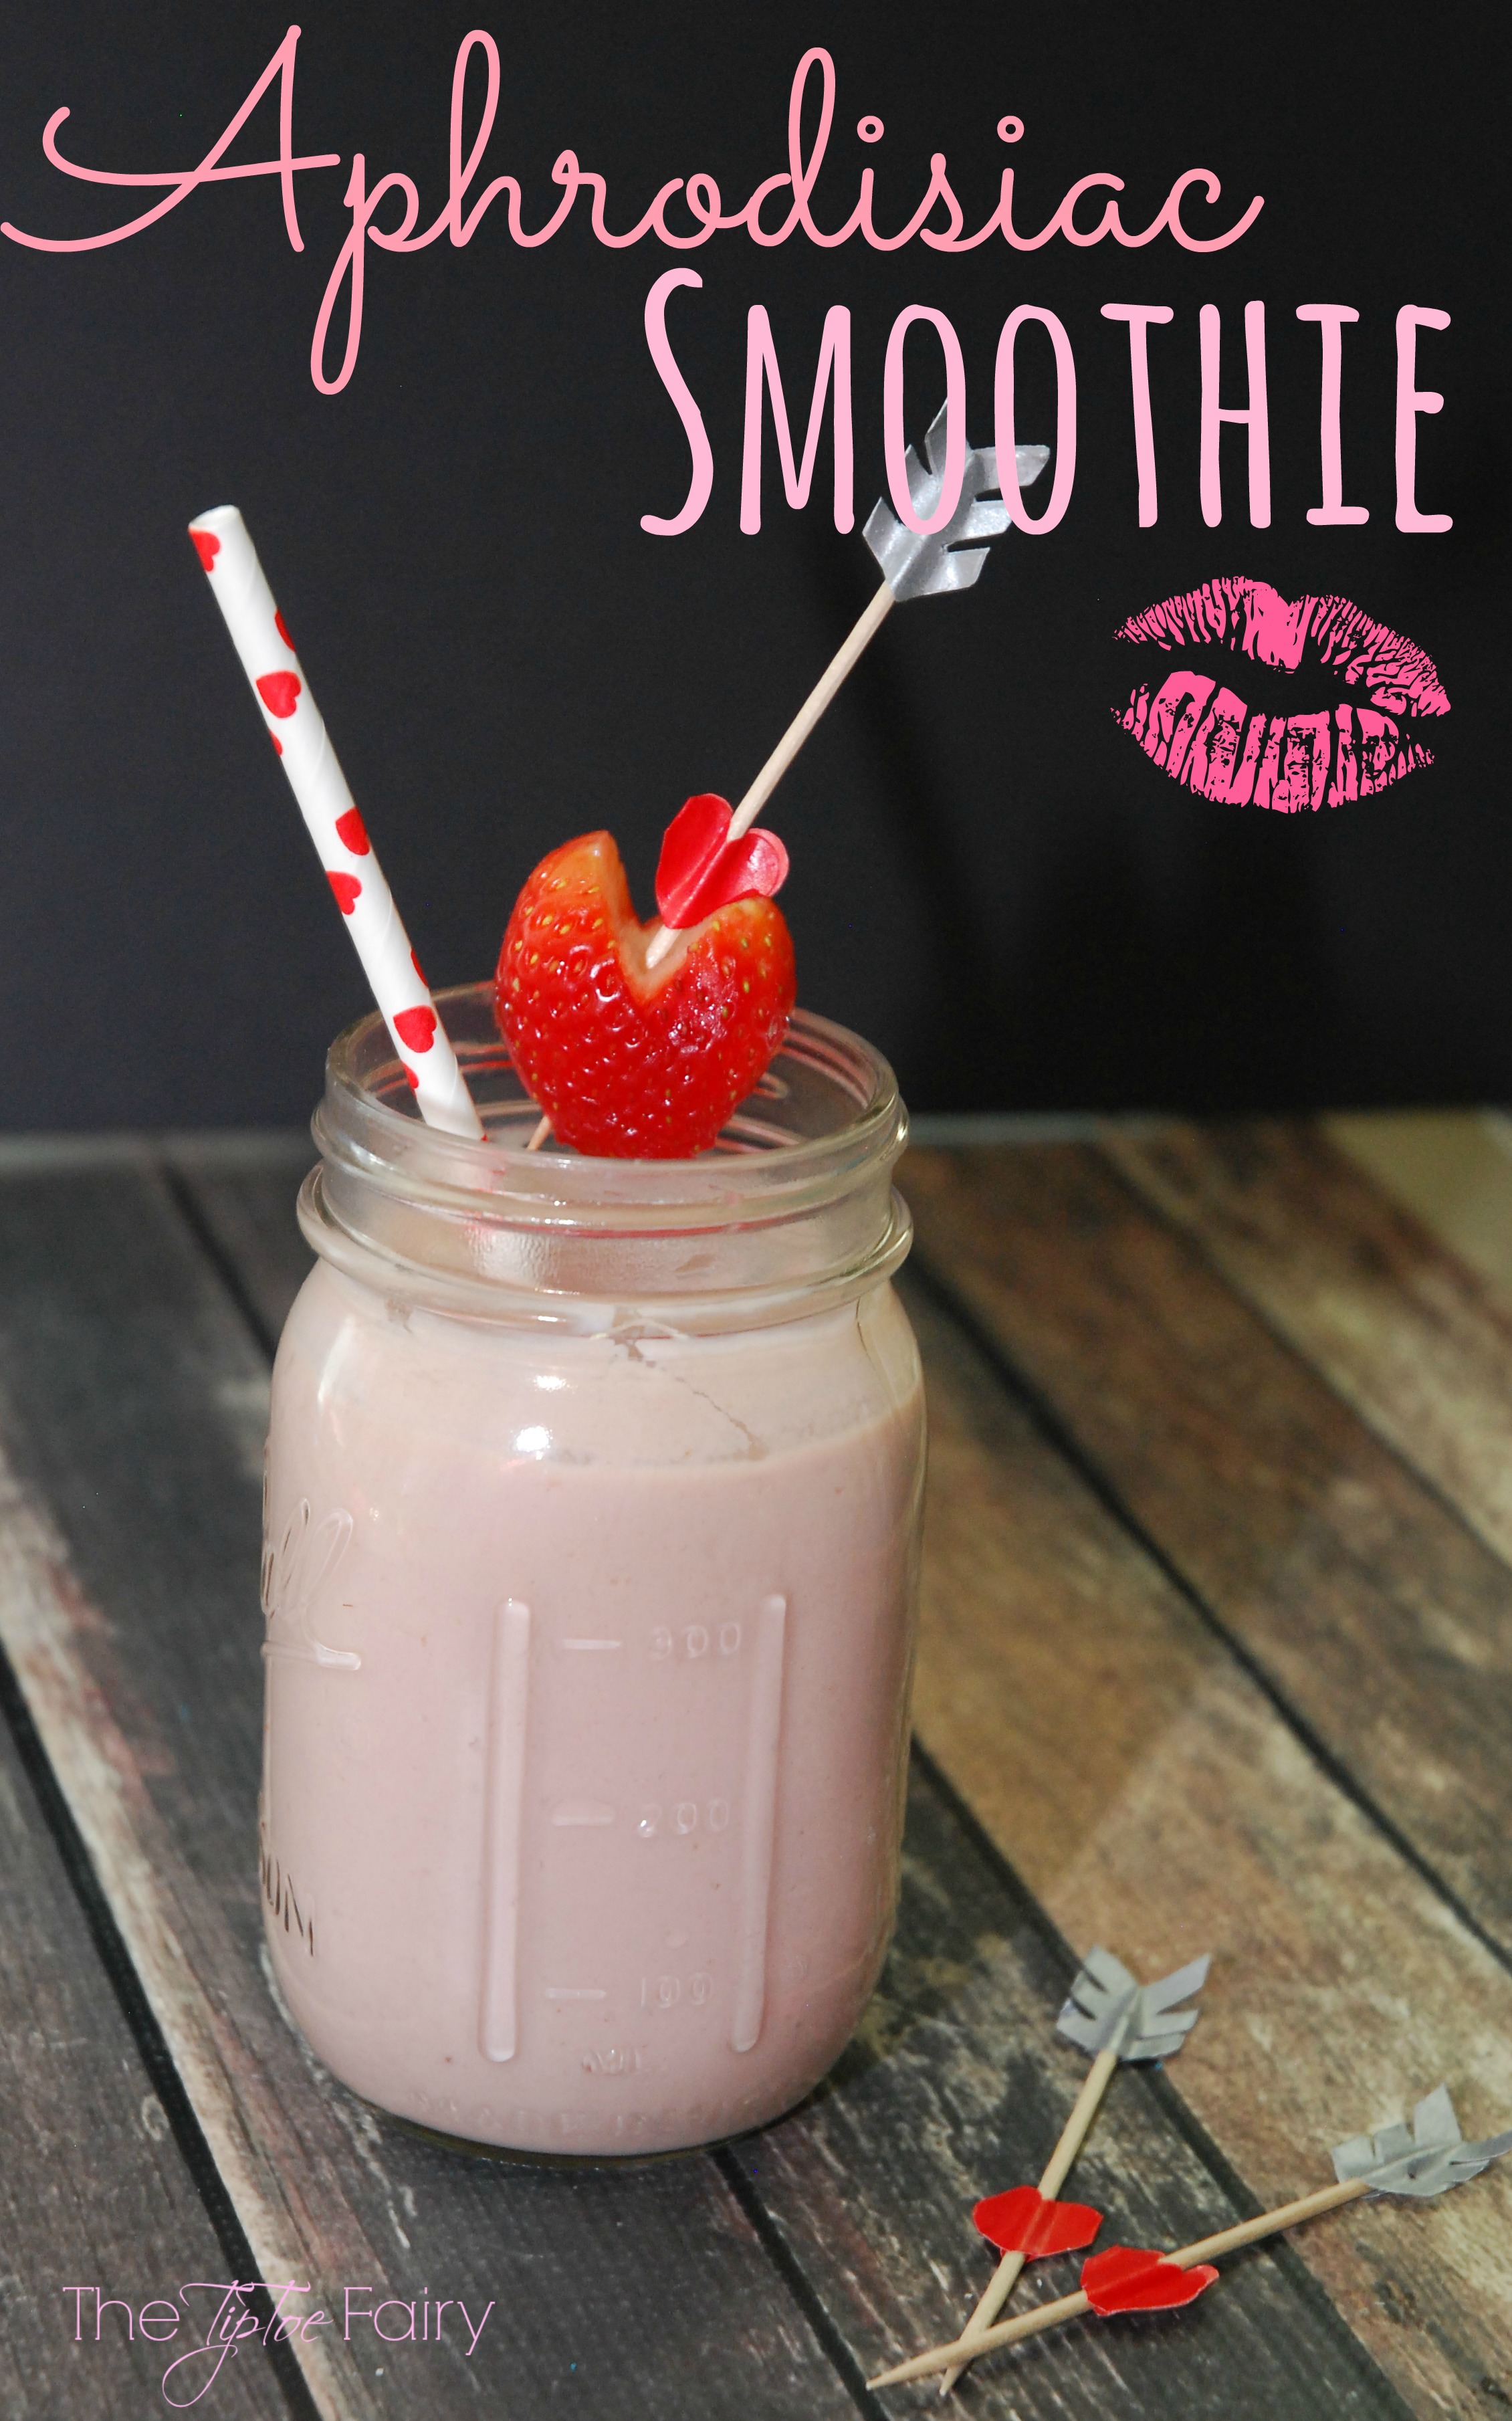 Originate an Aphrodisiac #Smoothie on your #Fancy for #ValentinesDay #meals #recipe #yum